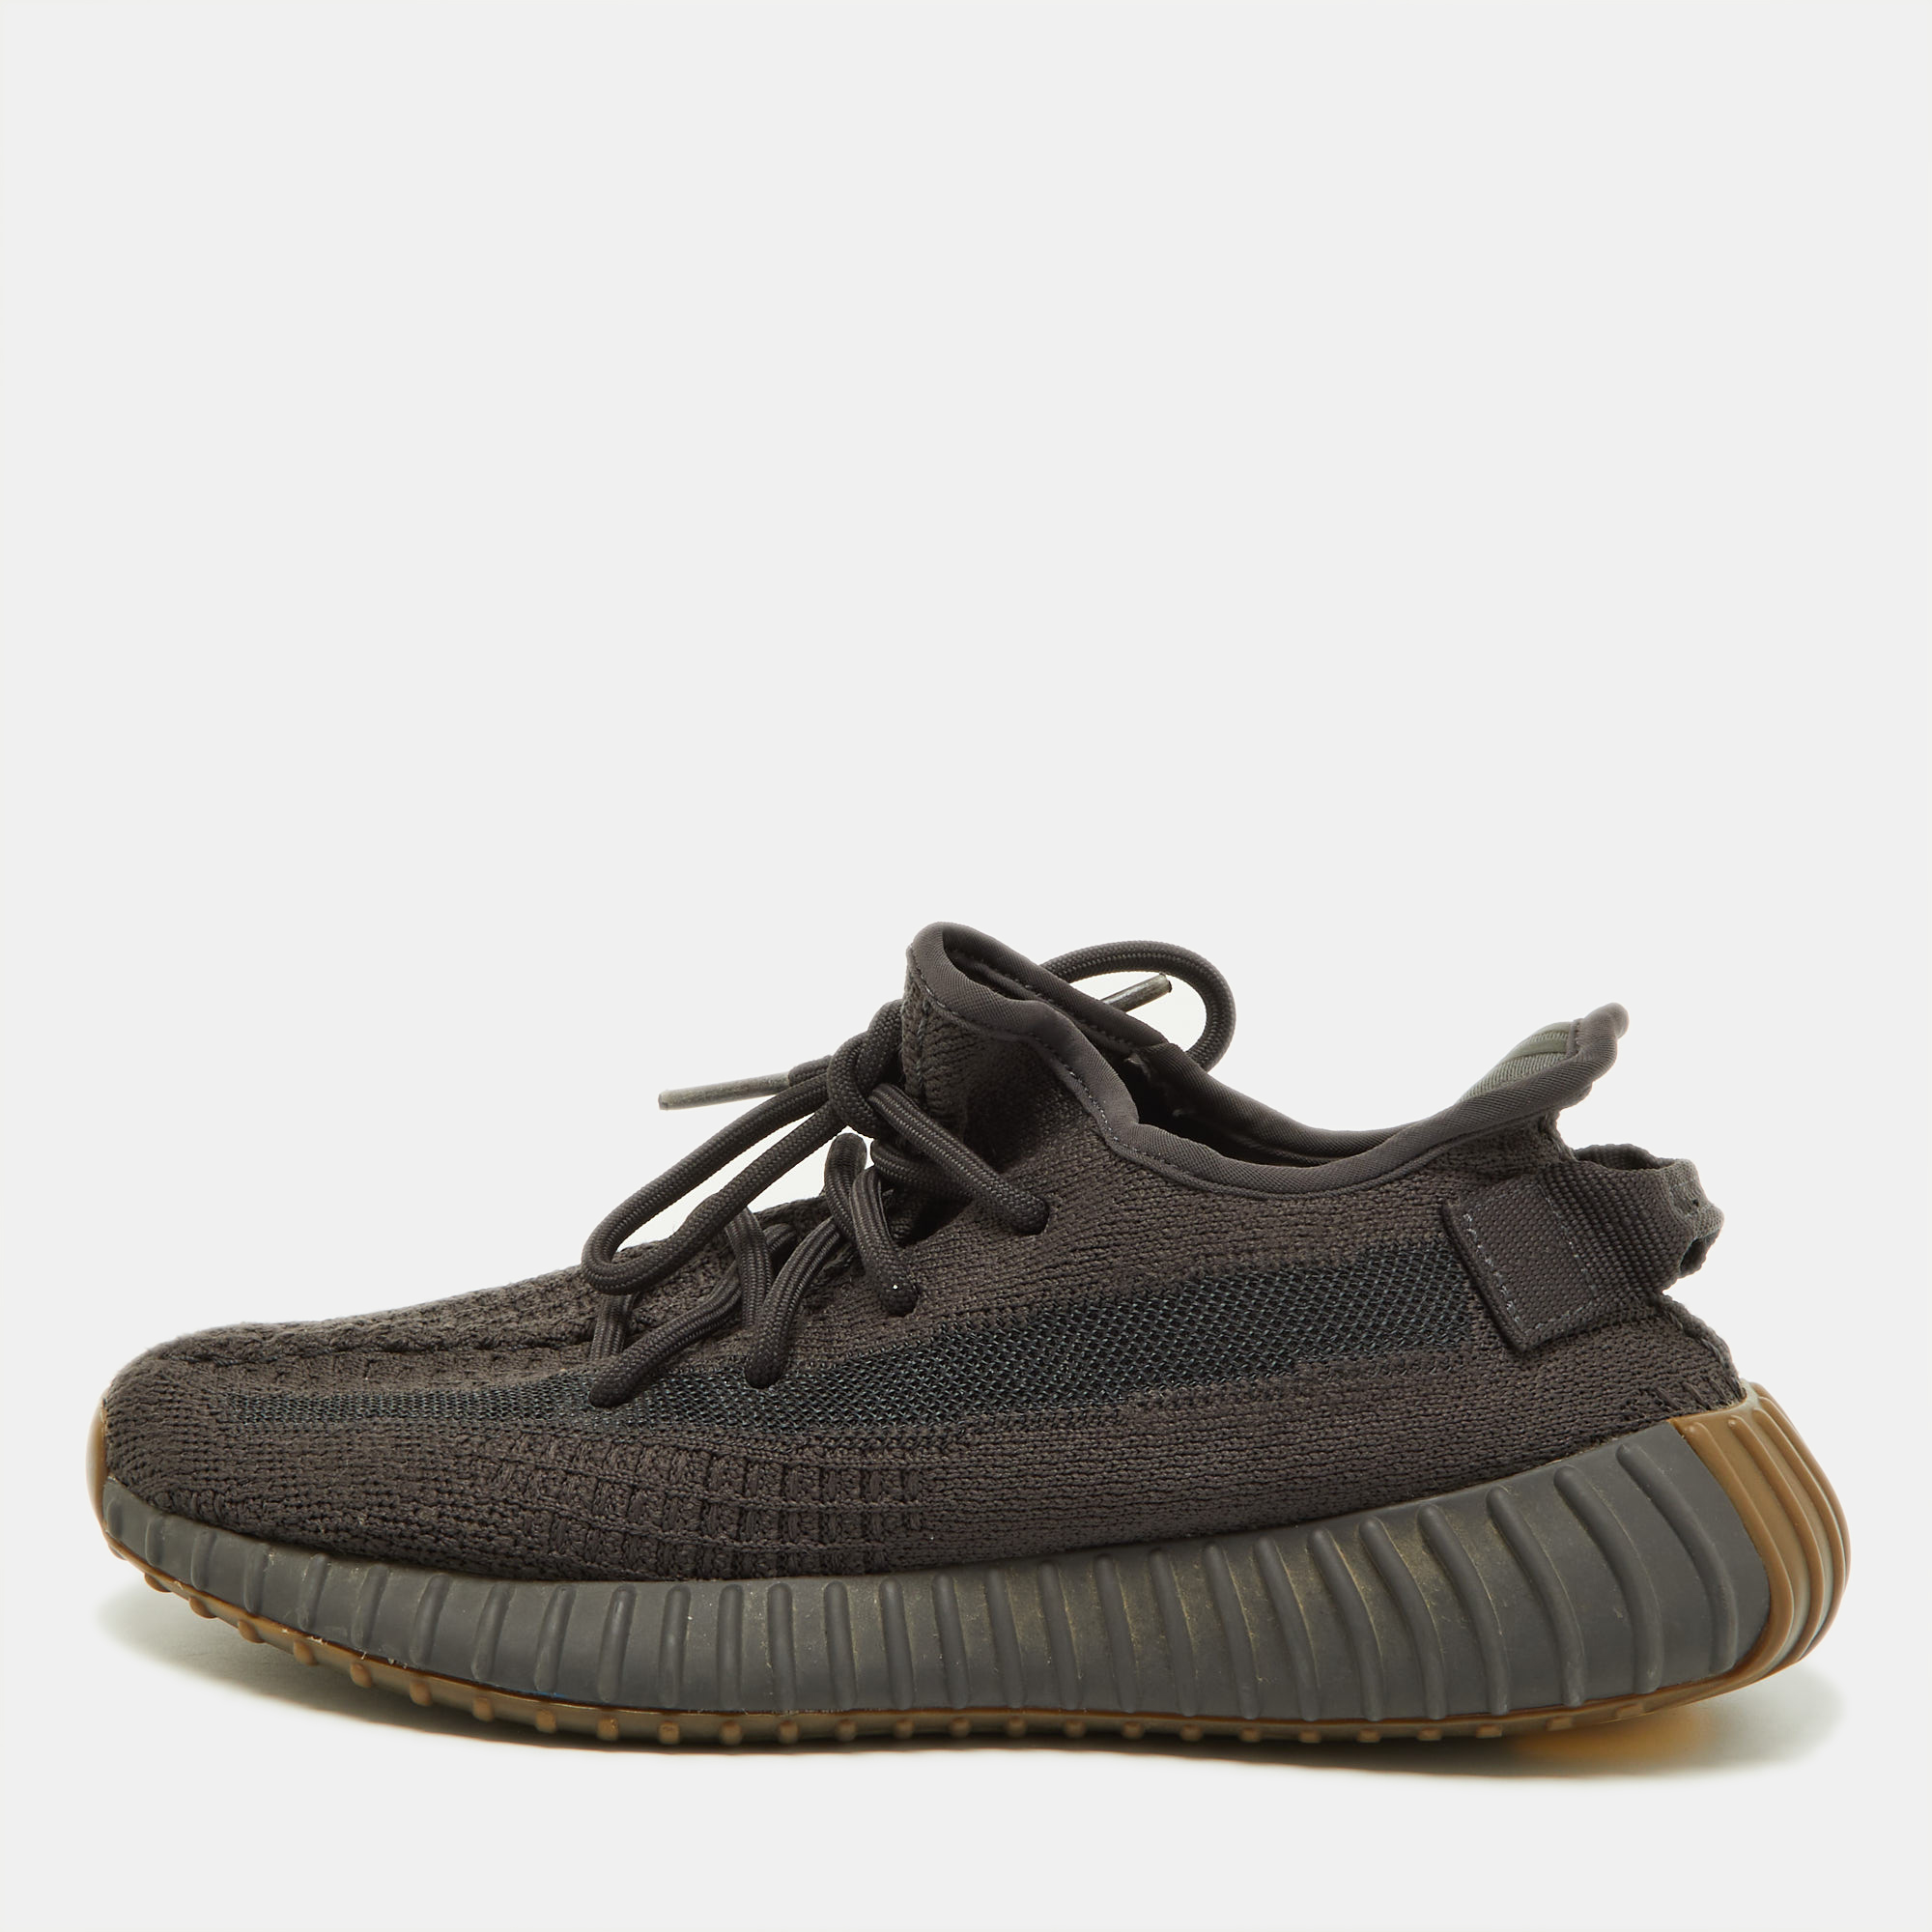 

Yeezy x Adidas Black knit Fabric Boost 350 V2 Sneakers Size, Grey